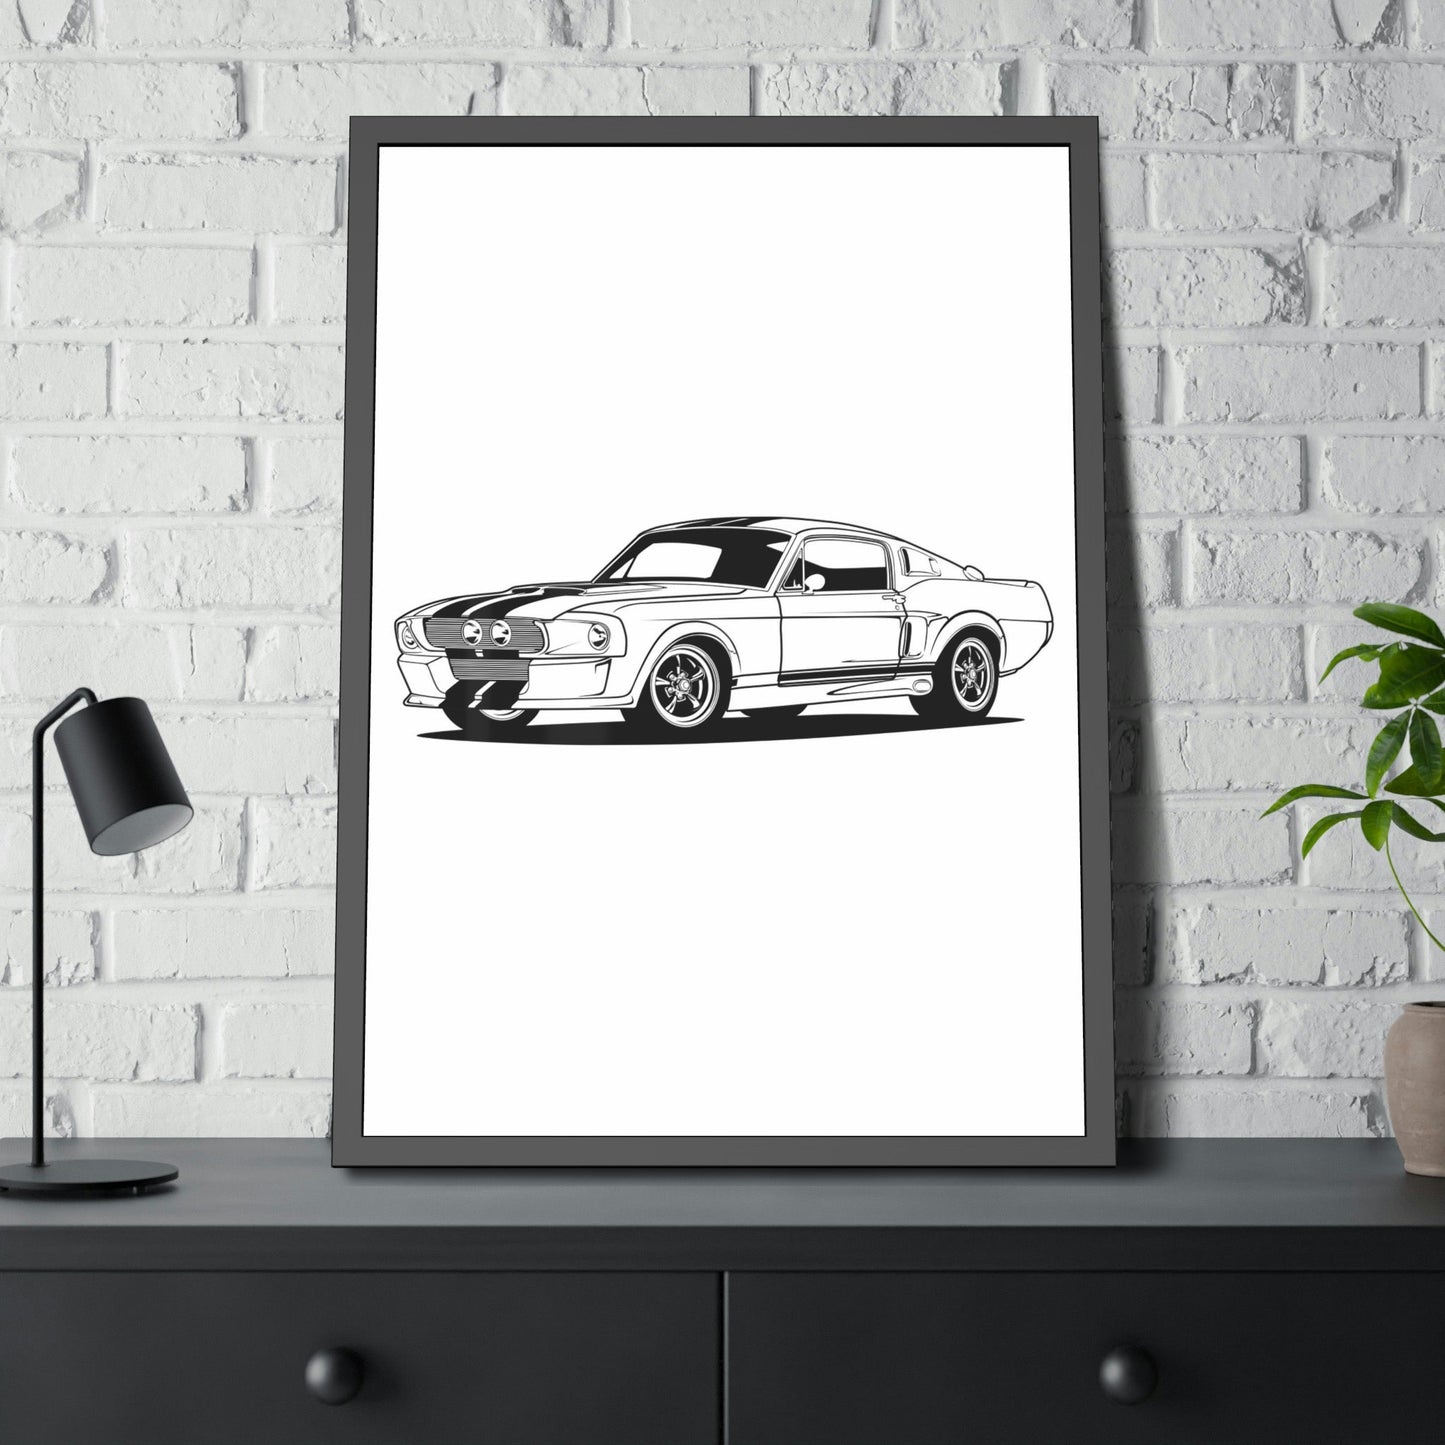 Thrill of the Ride: Framed Canvas Poster of a Mustang Sports Car for Automotive Art Connoisseurs